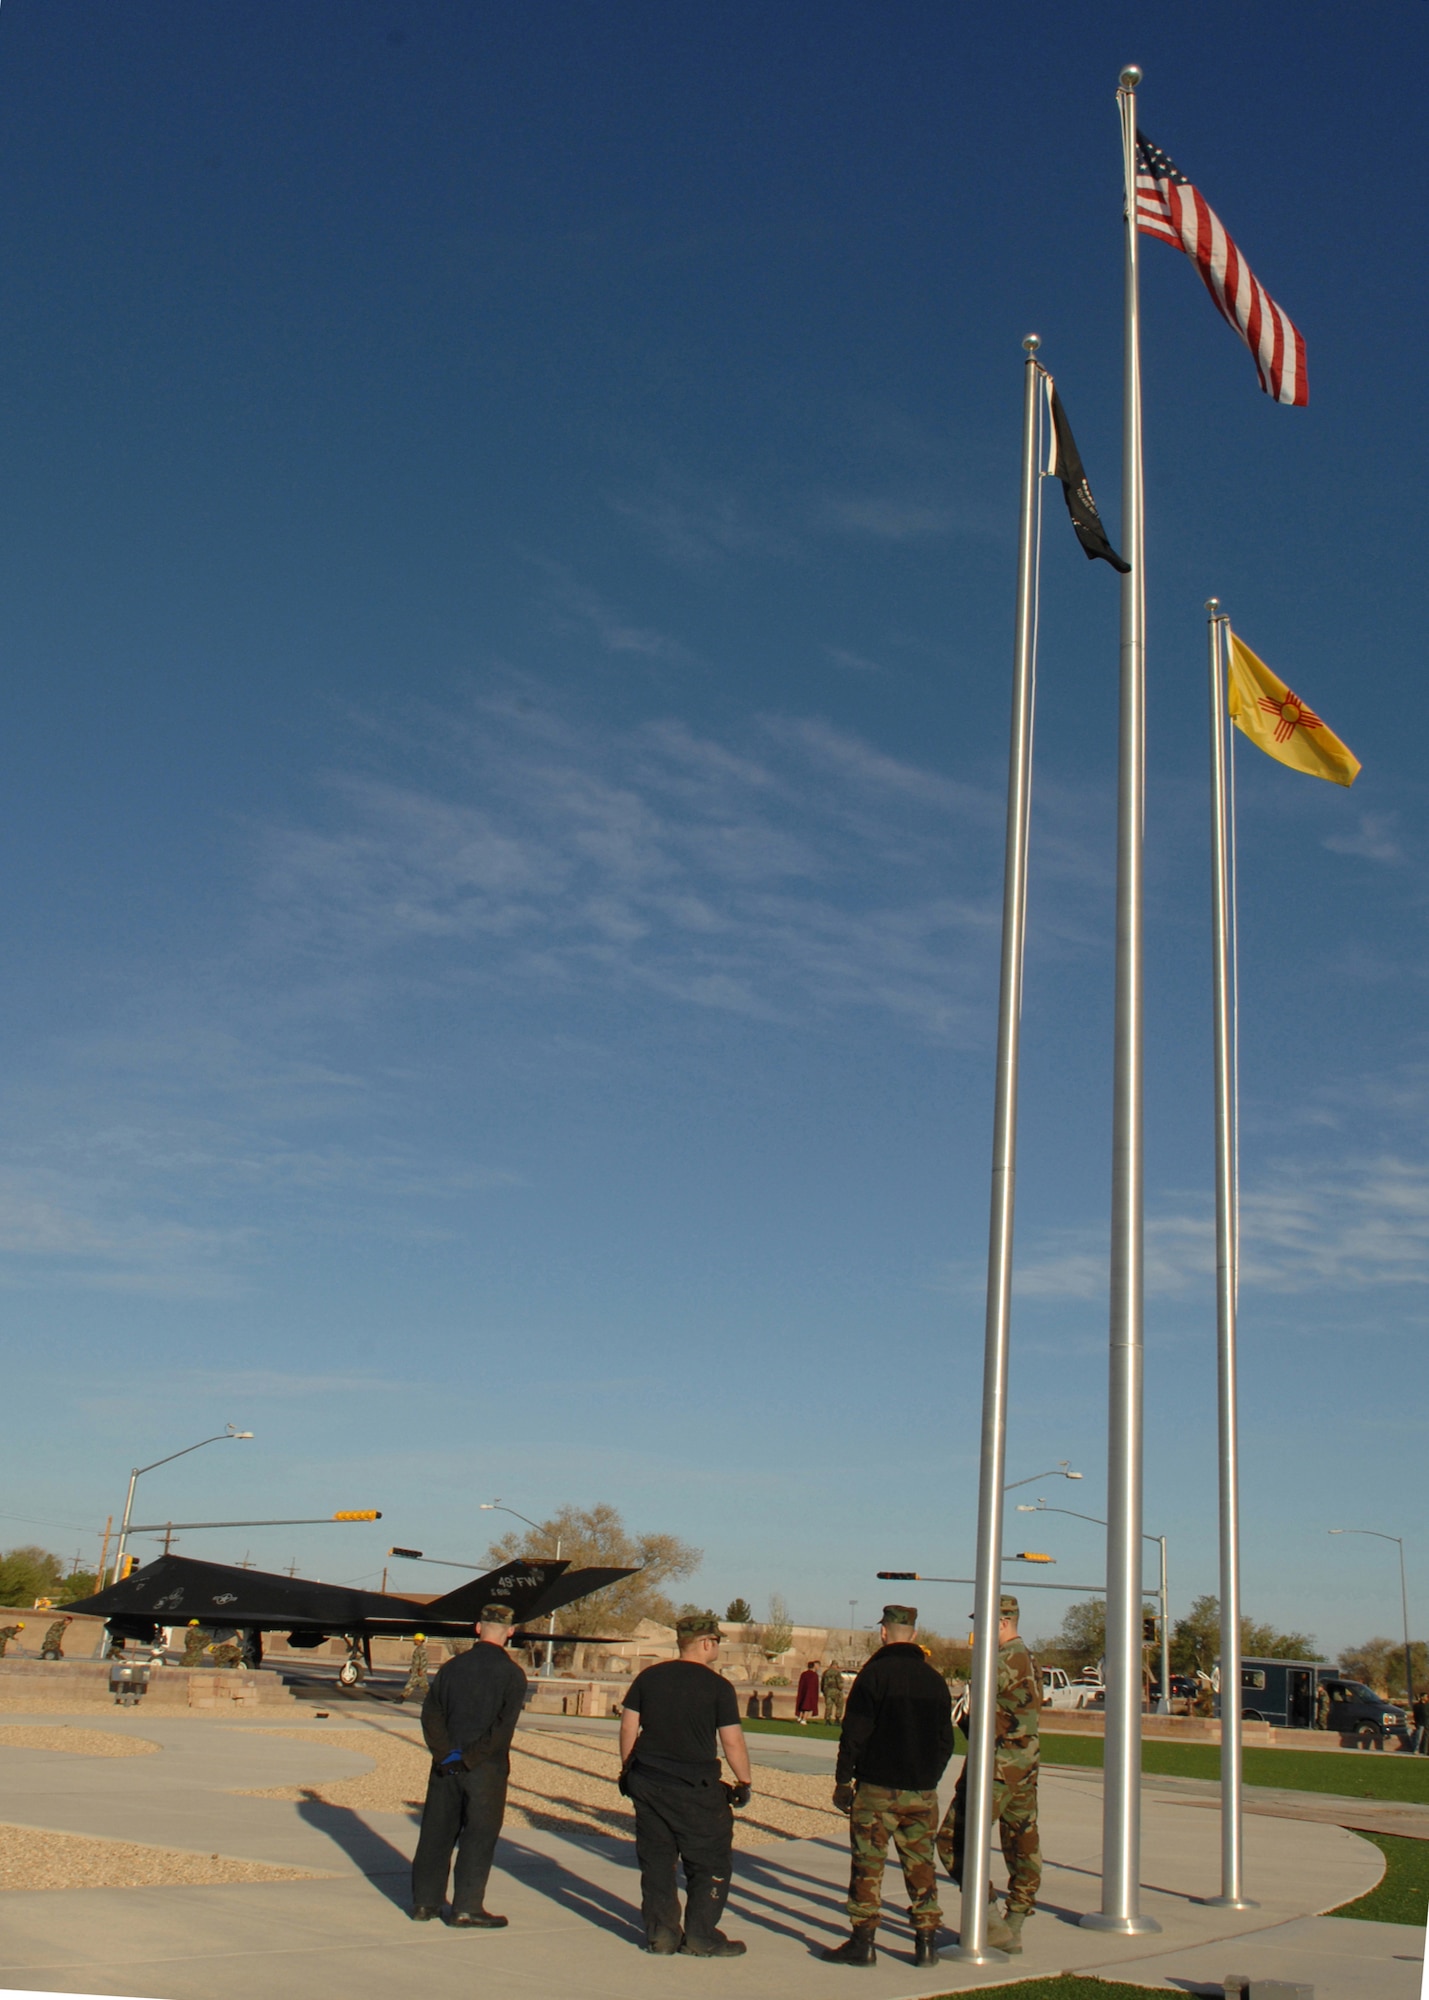 HOLLOMAN AIR FORCE BASE, N.M. -- Airmen from the 49th Maintenance Squadron watch as the F-117A is placed in its designated area in Heritage Park here April 5. The F-117A was moved to the park among many other retired aircraft because of its upcoming retirement. (U.S. Air Force photo by Airman Sondra M. Wieseler)